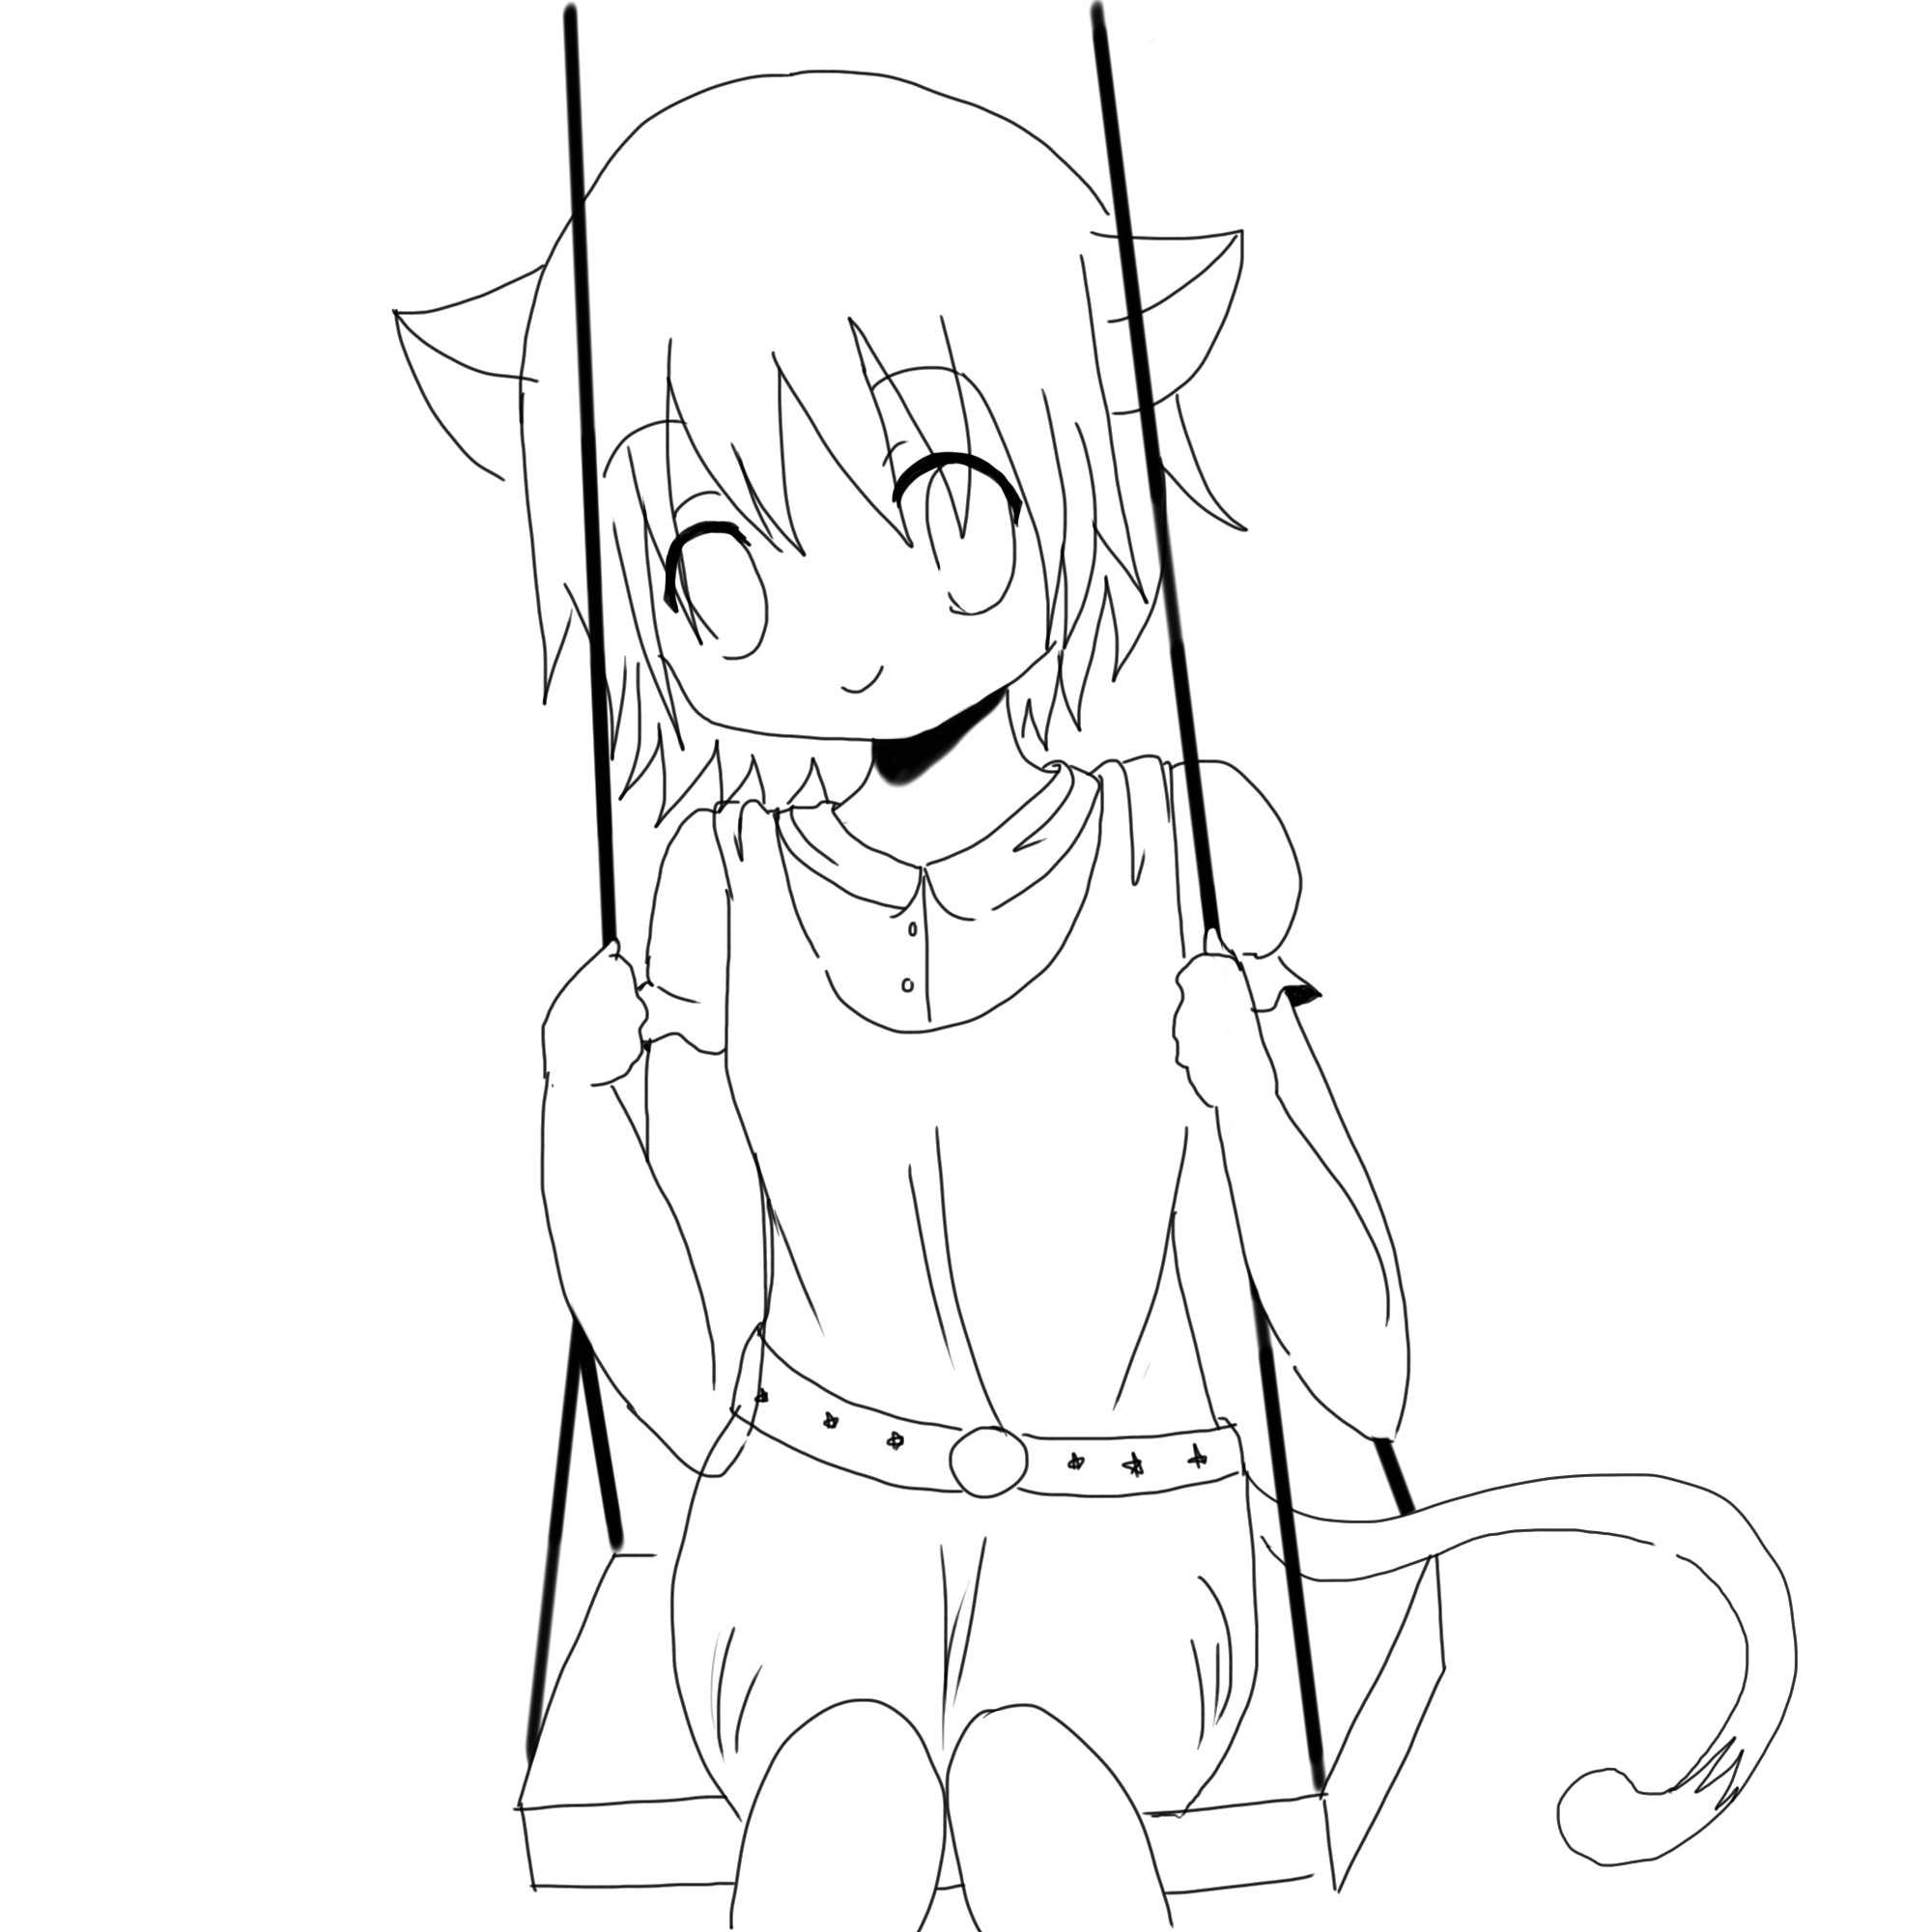 Cat Coloring Pages For Girls
 Cute Anime Cat Coloring Pages Neko Girl Lineart By